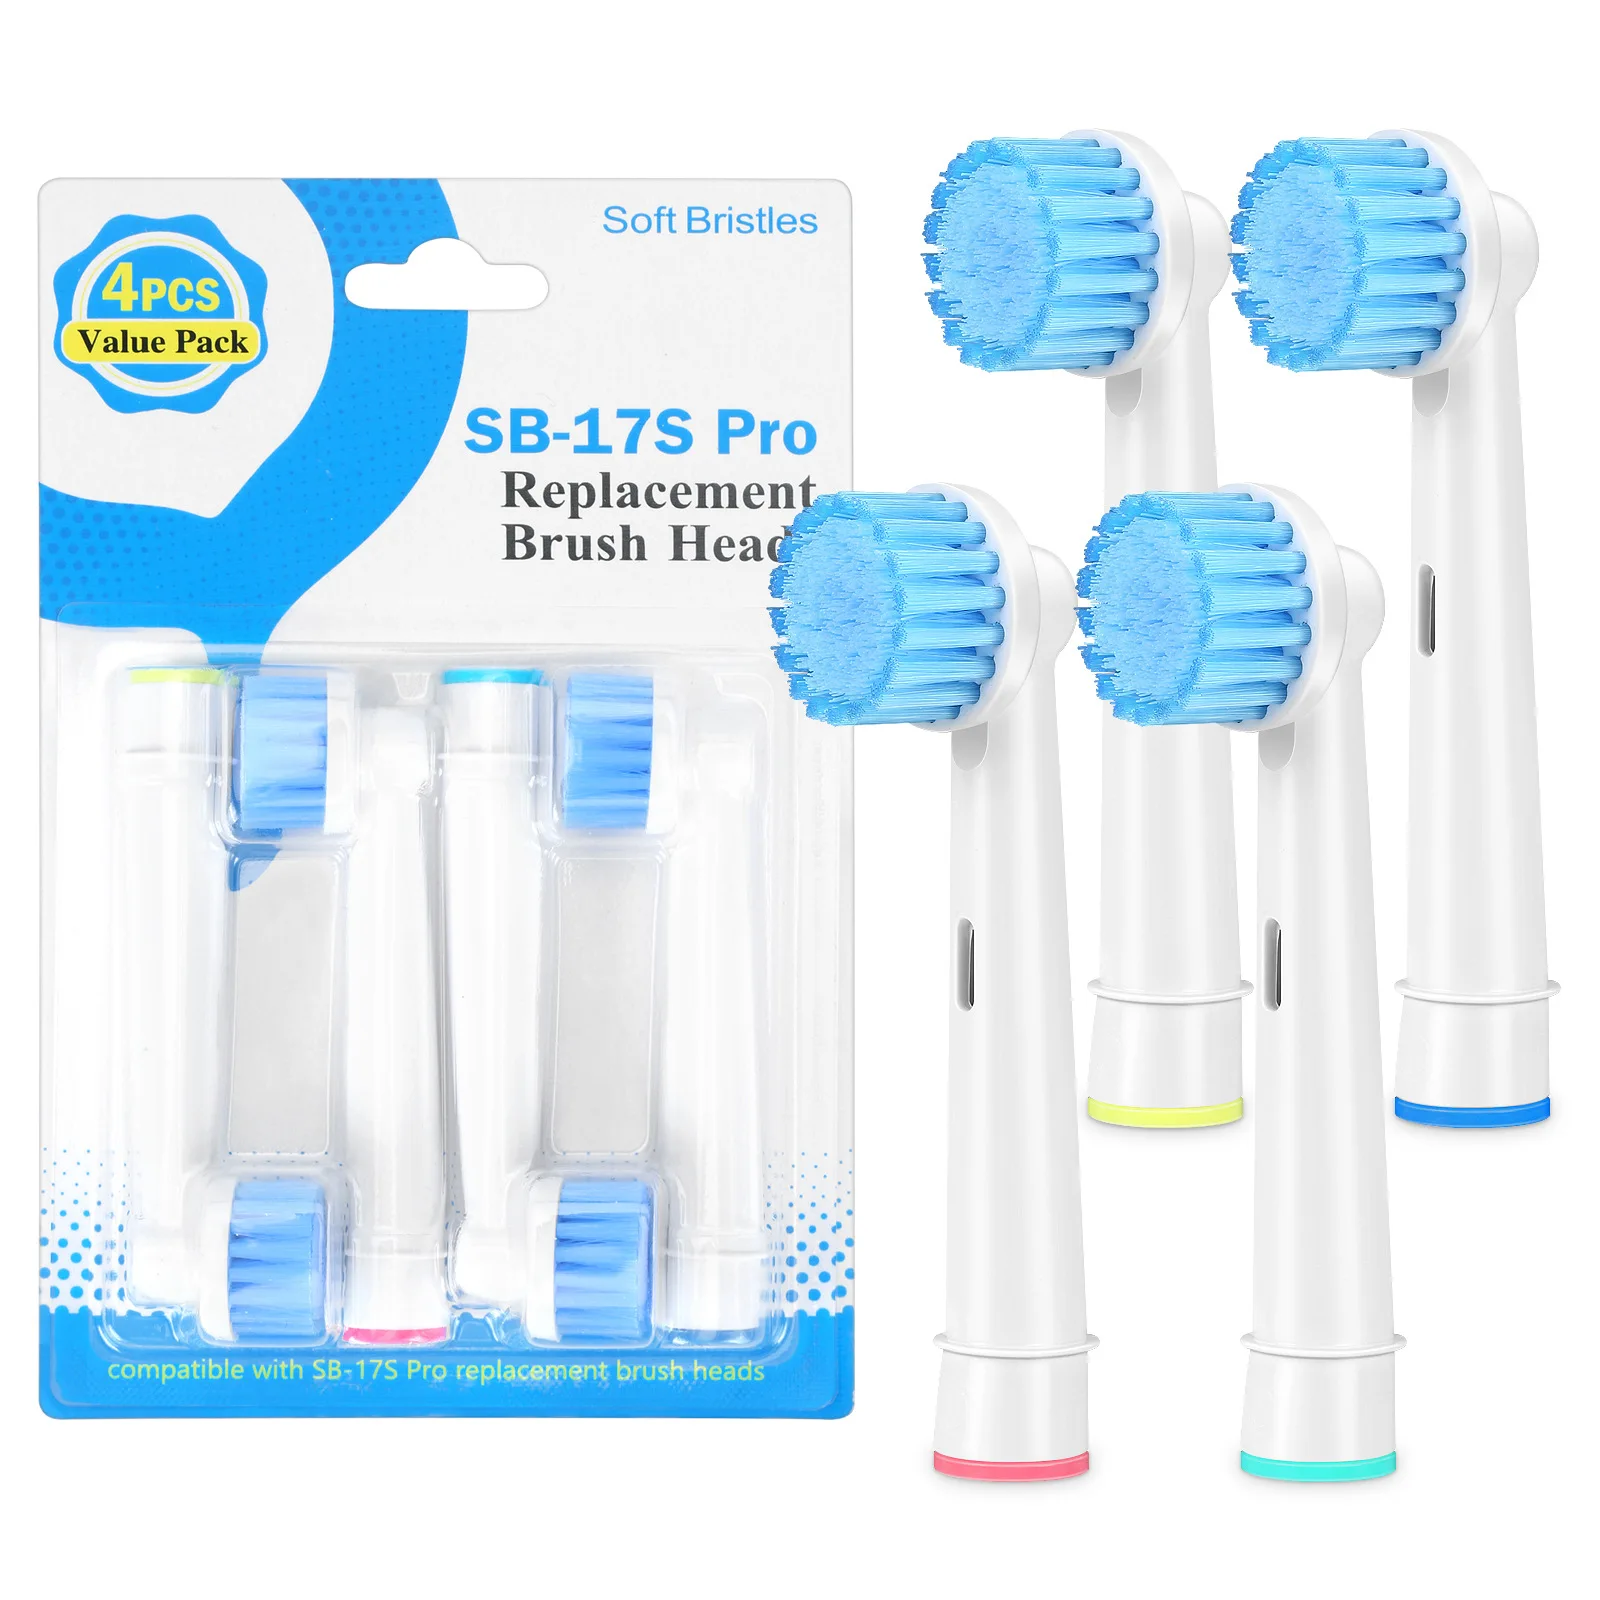 4 Pcs/Pack Replacement Brush Heads For Oral B Electric Toothbrush Head Soft Dupont Bristle Teeth Cleaning & Whitening Brush Head 4 pcs replacement toothbrushes heads for braun oral b electric toothbrush soft bristle precise cleaning brush heads for oral b